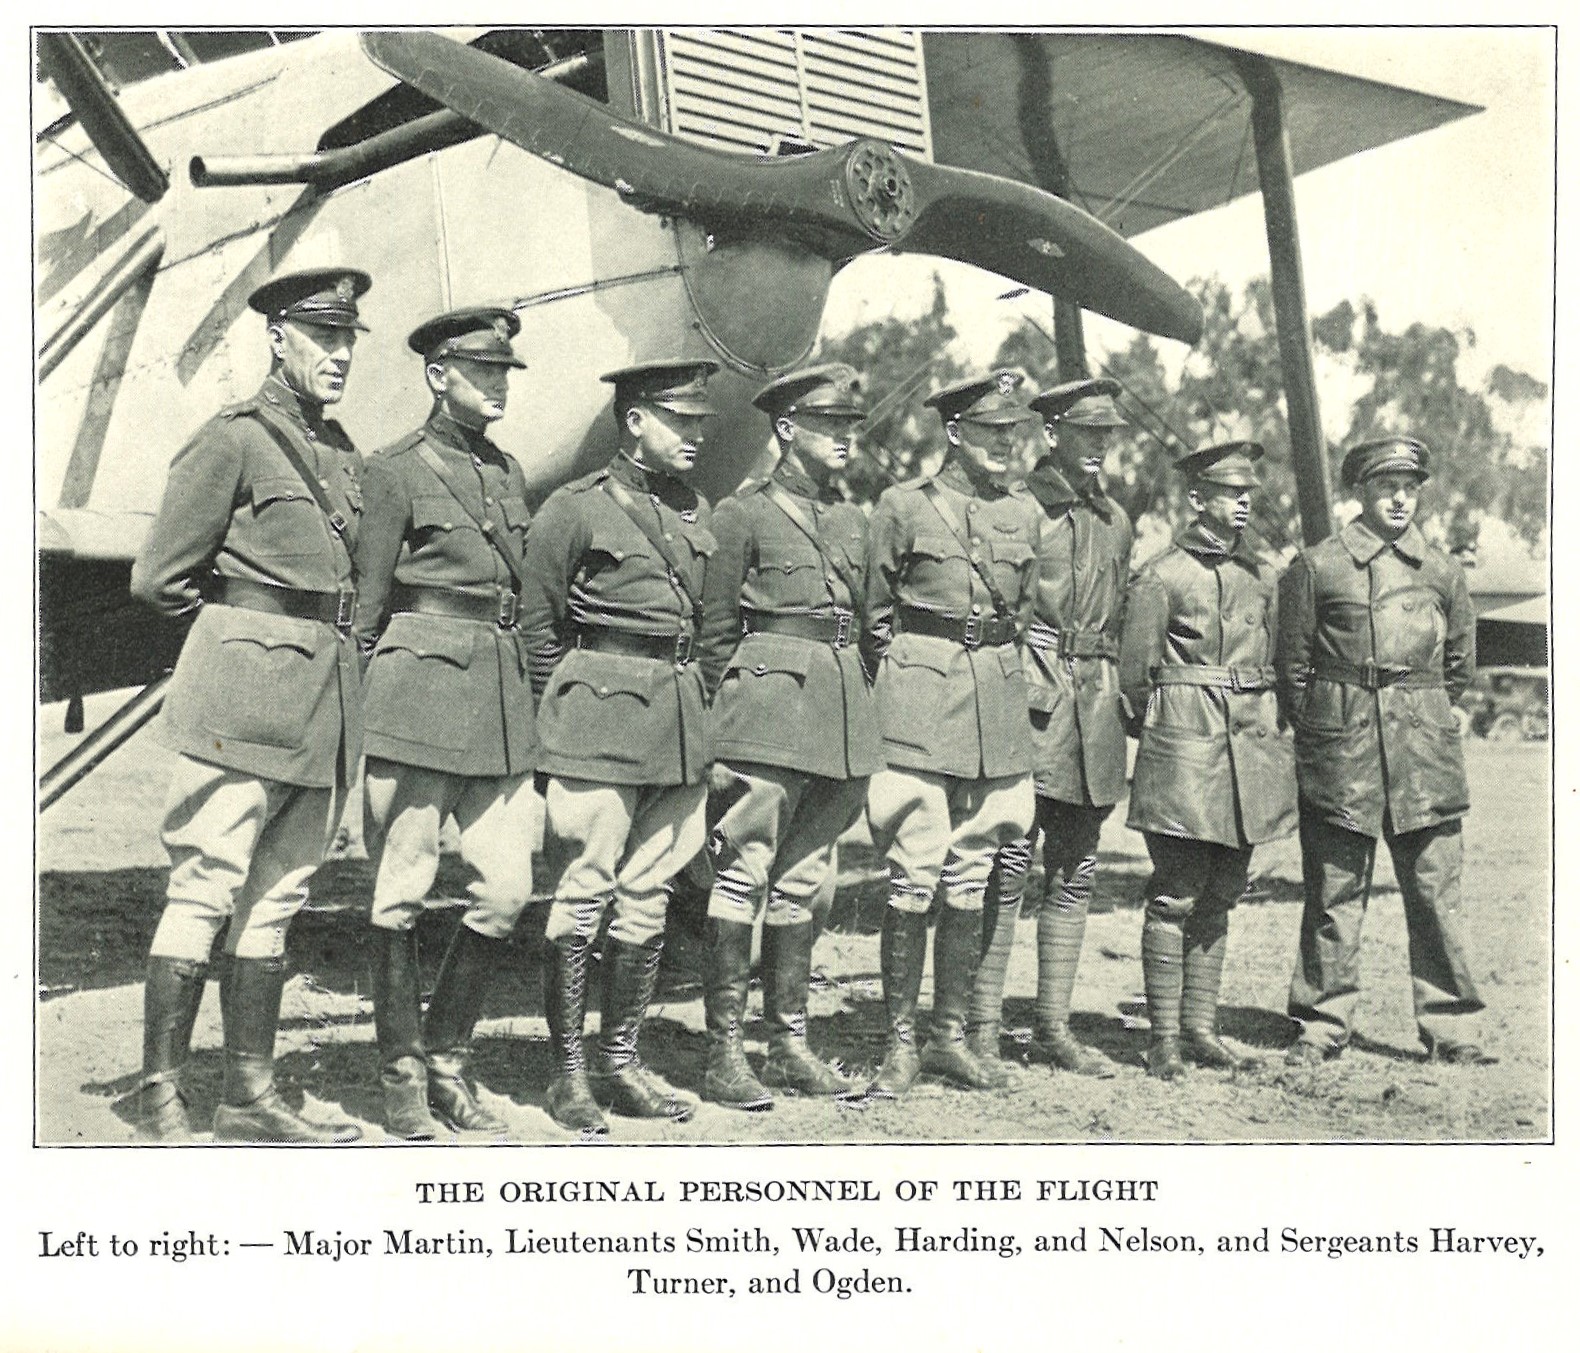 Photo of the original personnel of the world flight